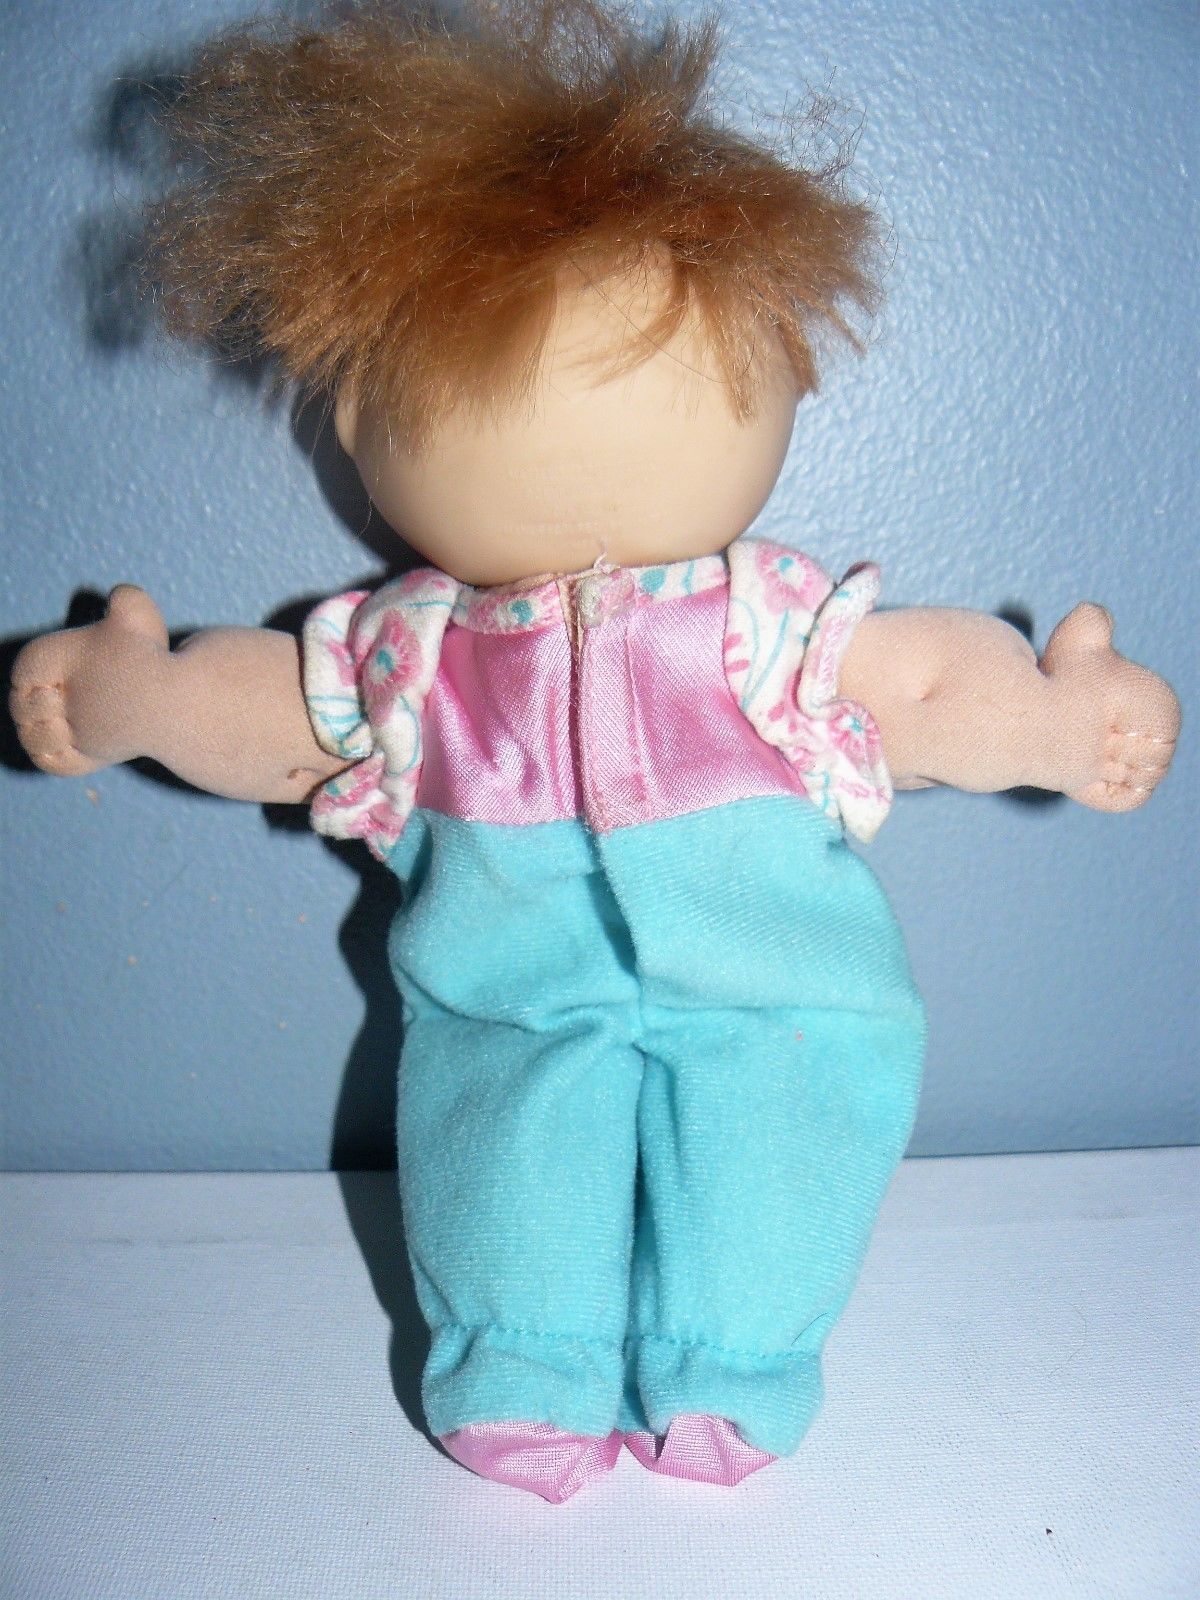 mattel's first edition cabbage patch doll 1995